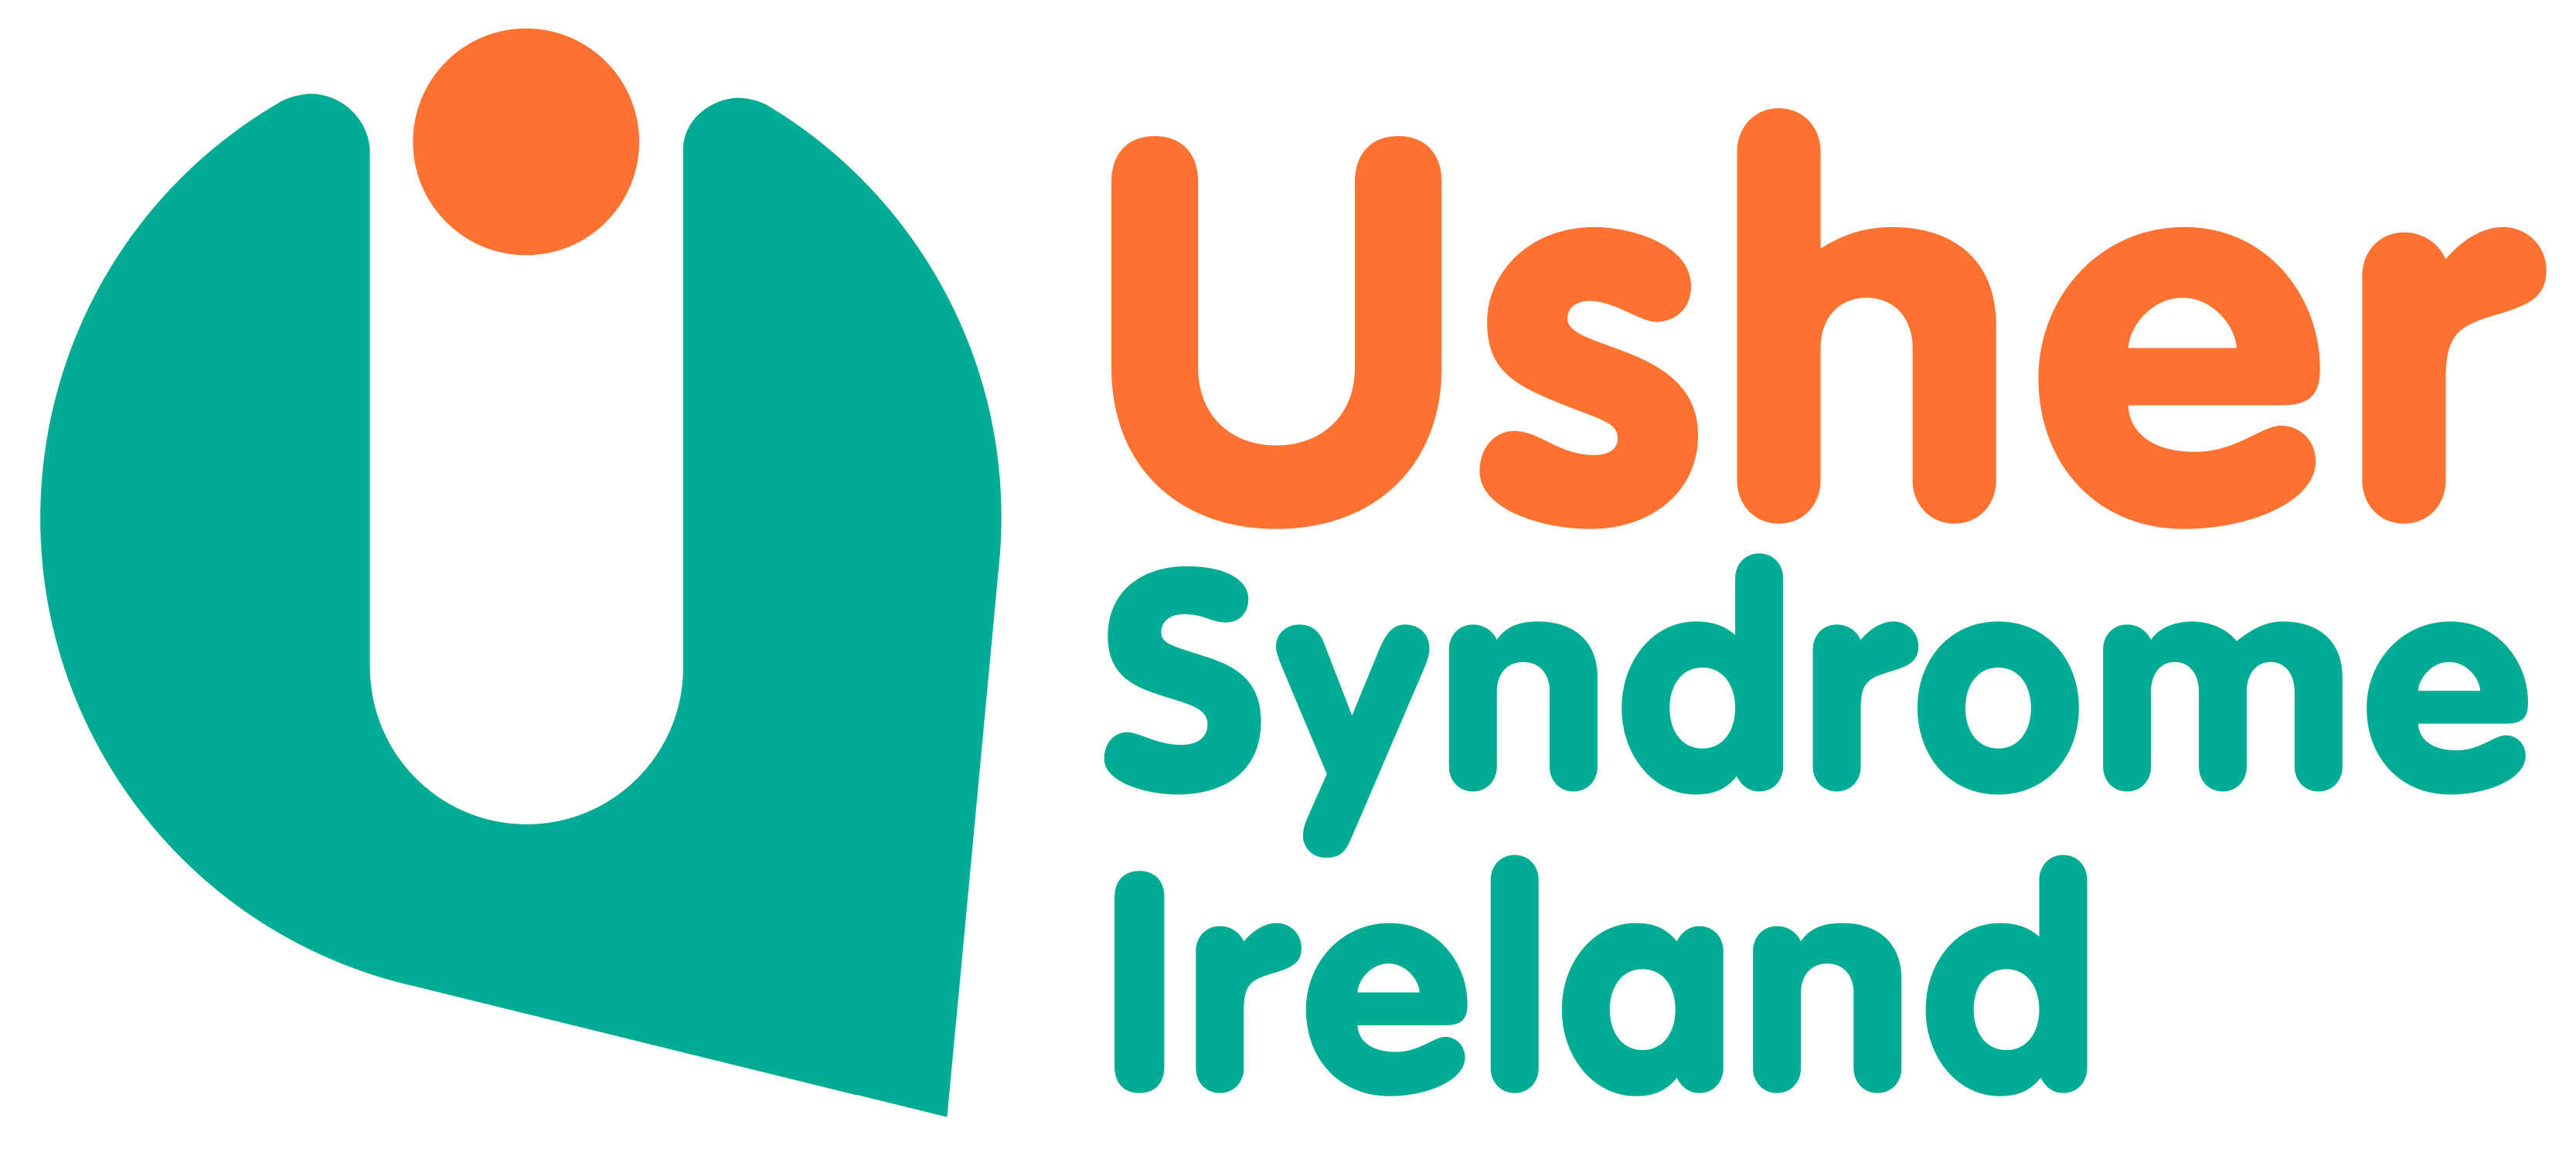 Usher Syndrome Ireland logo shows the name net to a green U holding an orange circle up